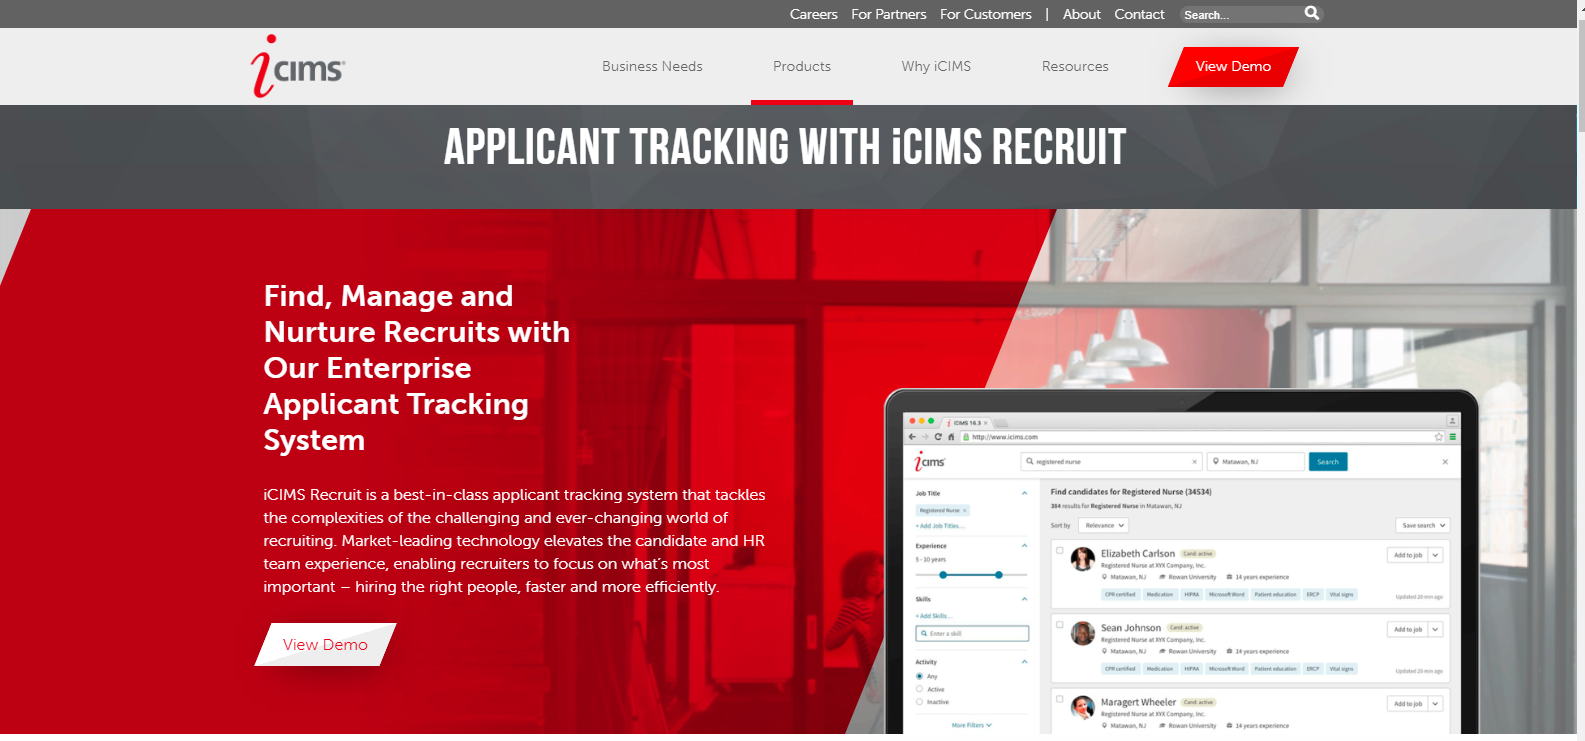 10 Best Recruiting Software For Small Businesses & Startups Companies-ICIMS-Fig 2